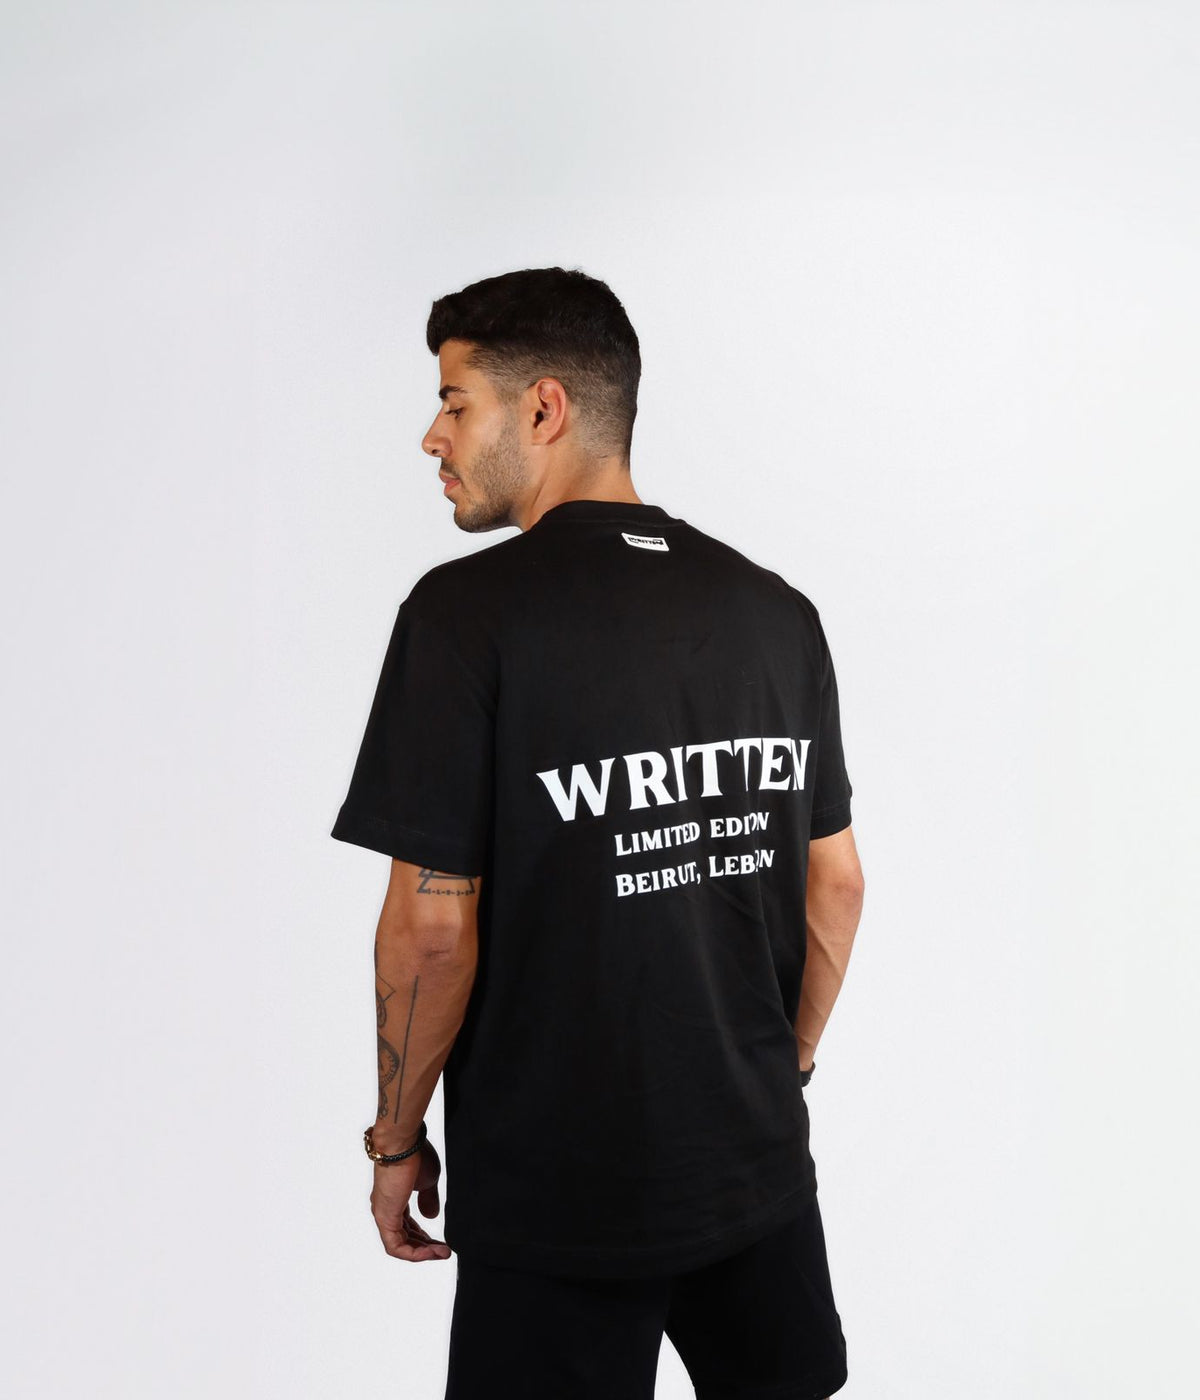 The Black Limited Edition Tee